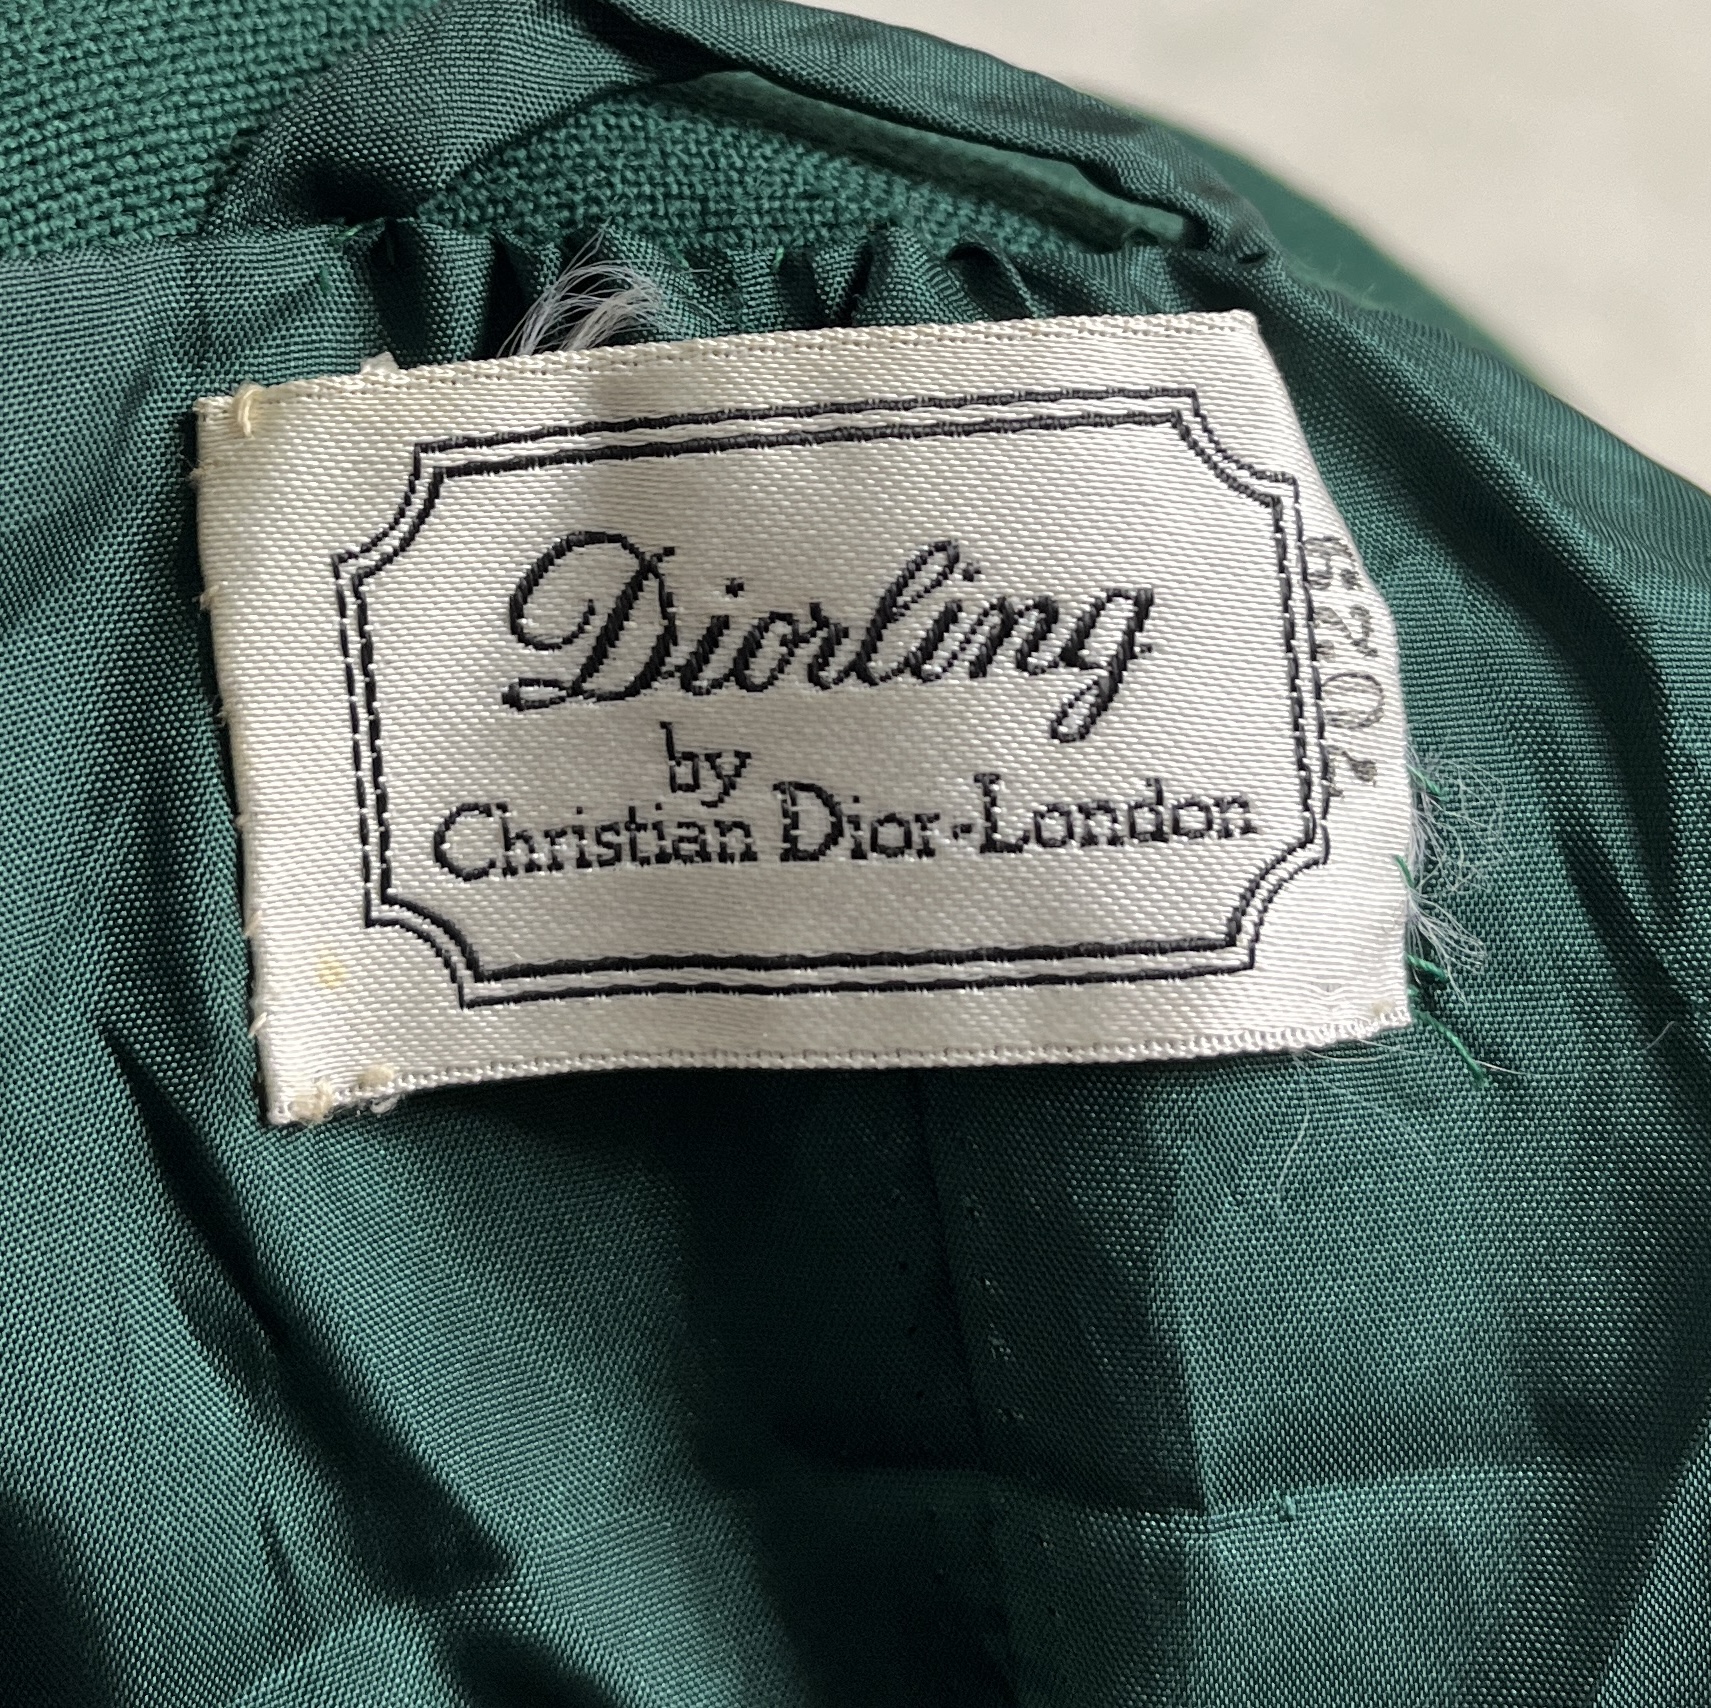 A vintage 1960's Christian Dior "Diorling" dress and jacket set, fully lined in emerald green - Image 2 of 3